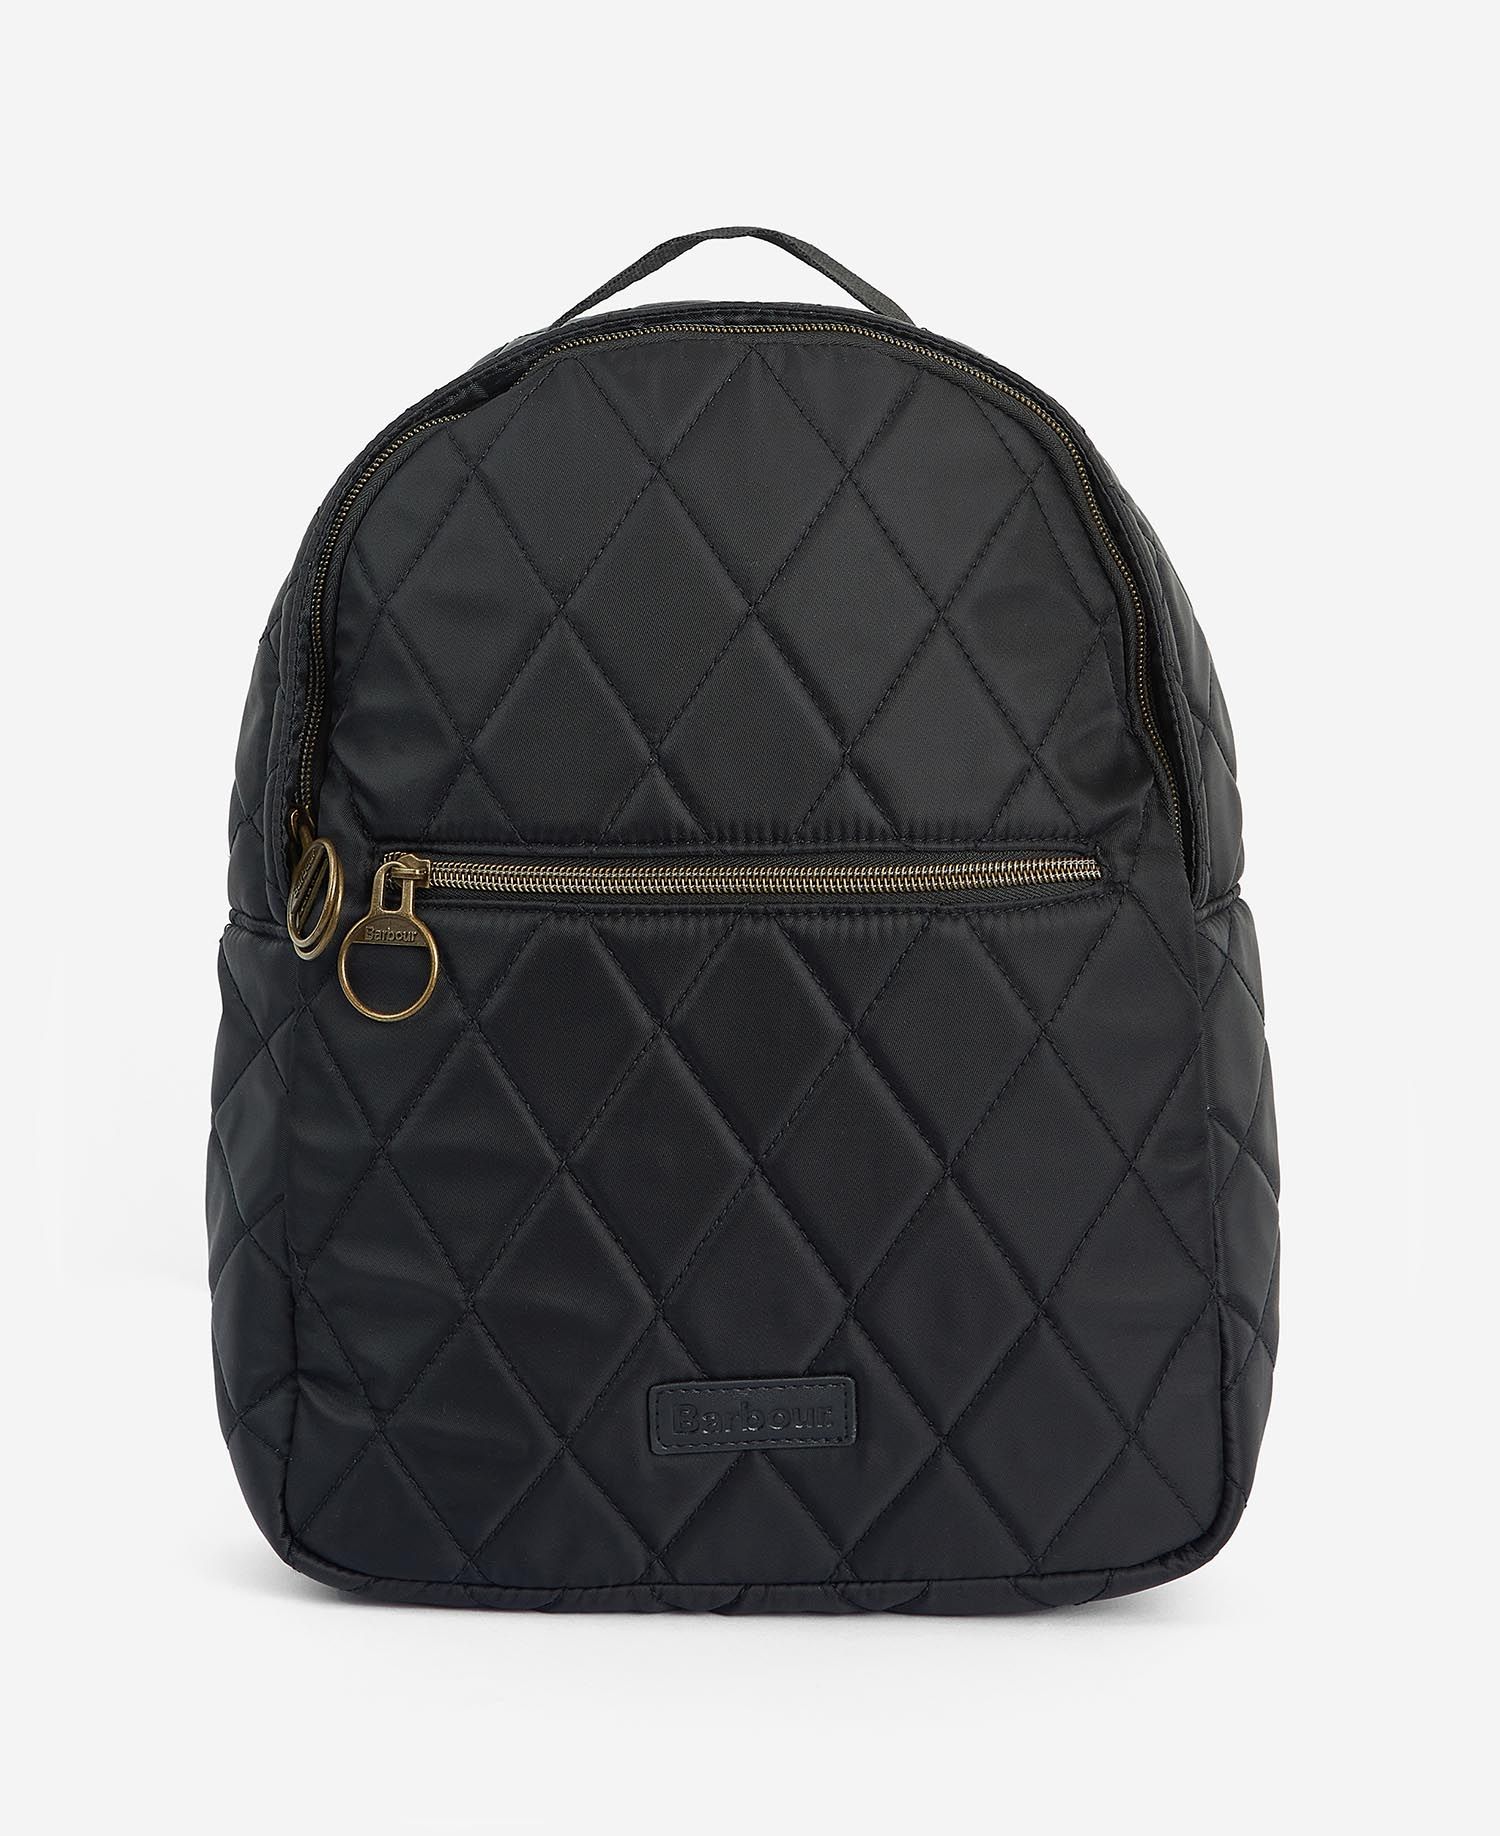 Barbour Quilted Backpack-Classic Black - Aston Bourne